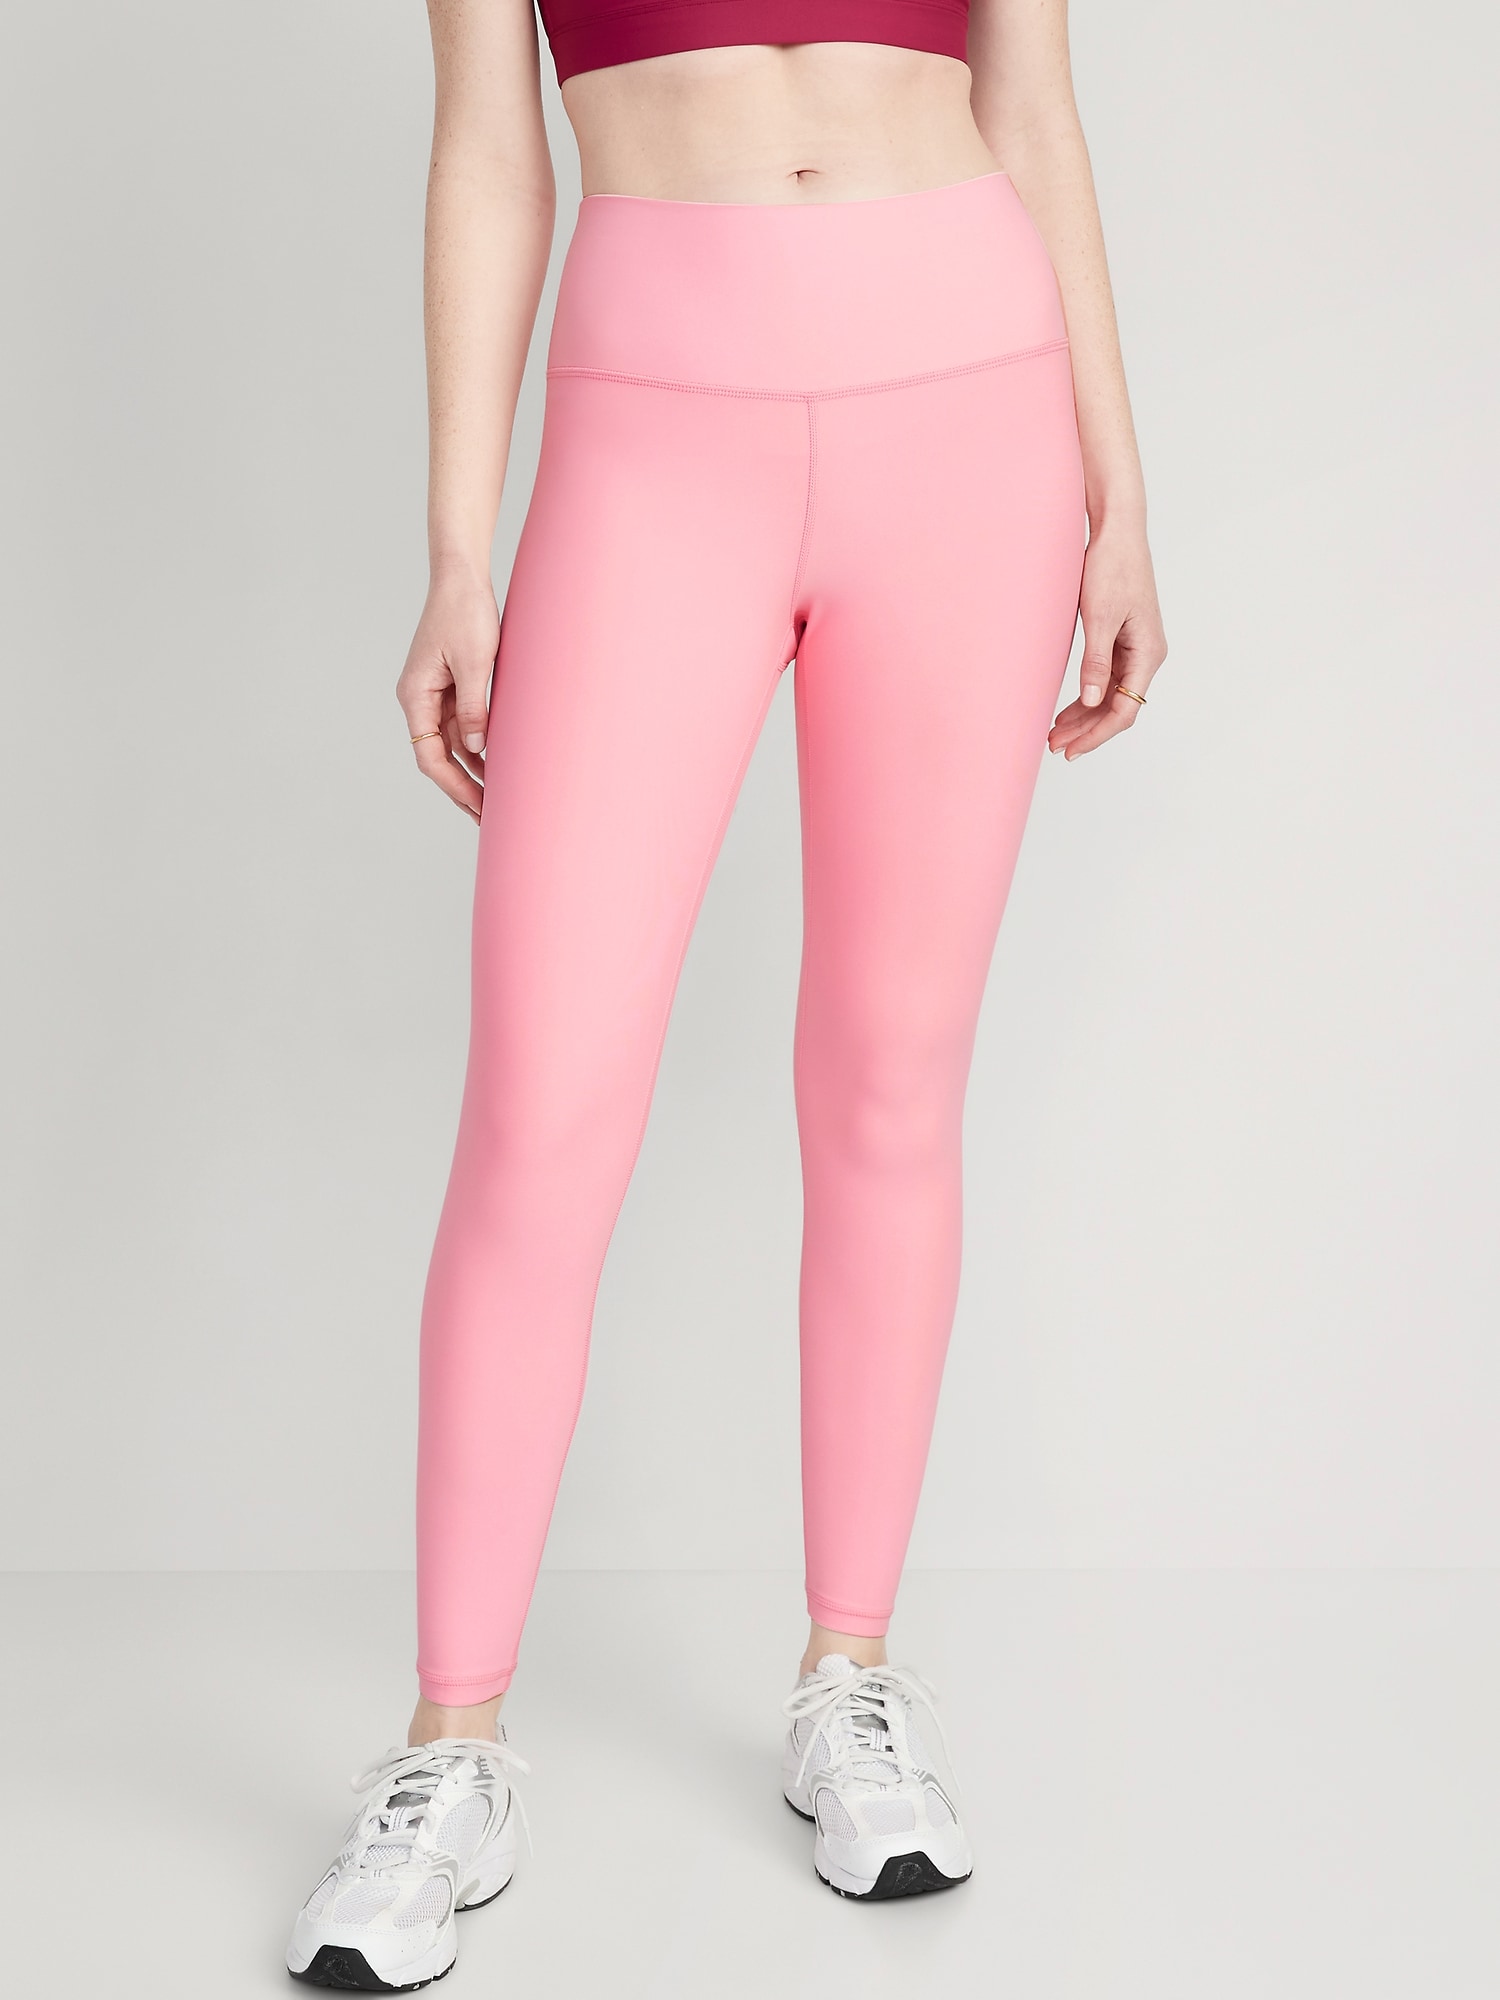 Old Navy High-Waisted PowerSoft 7/8 Leggings for Women pink - 537812082